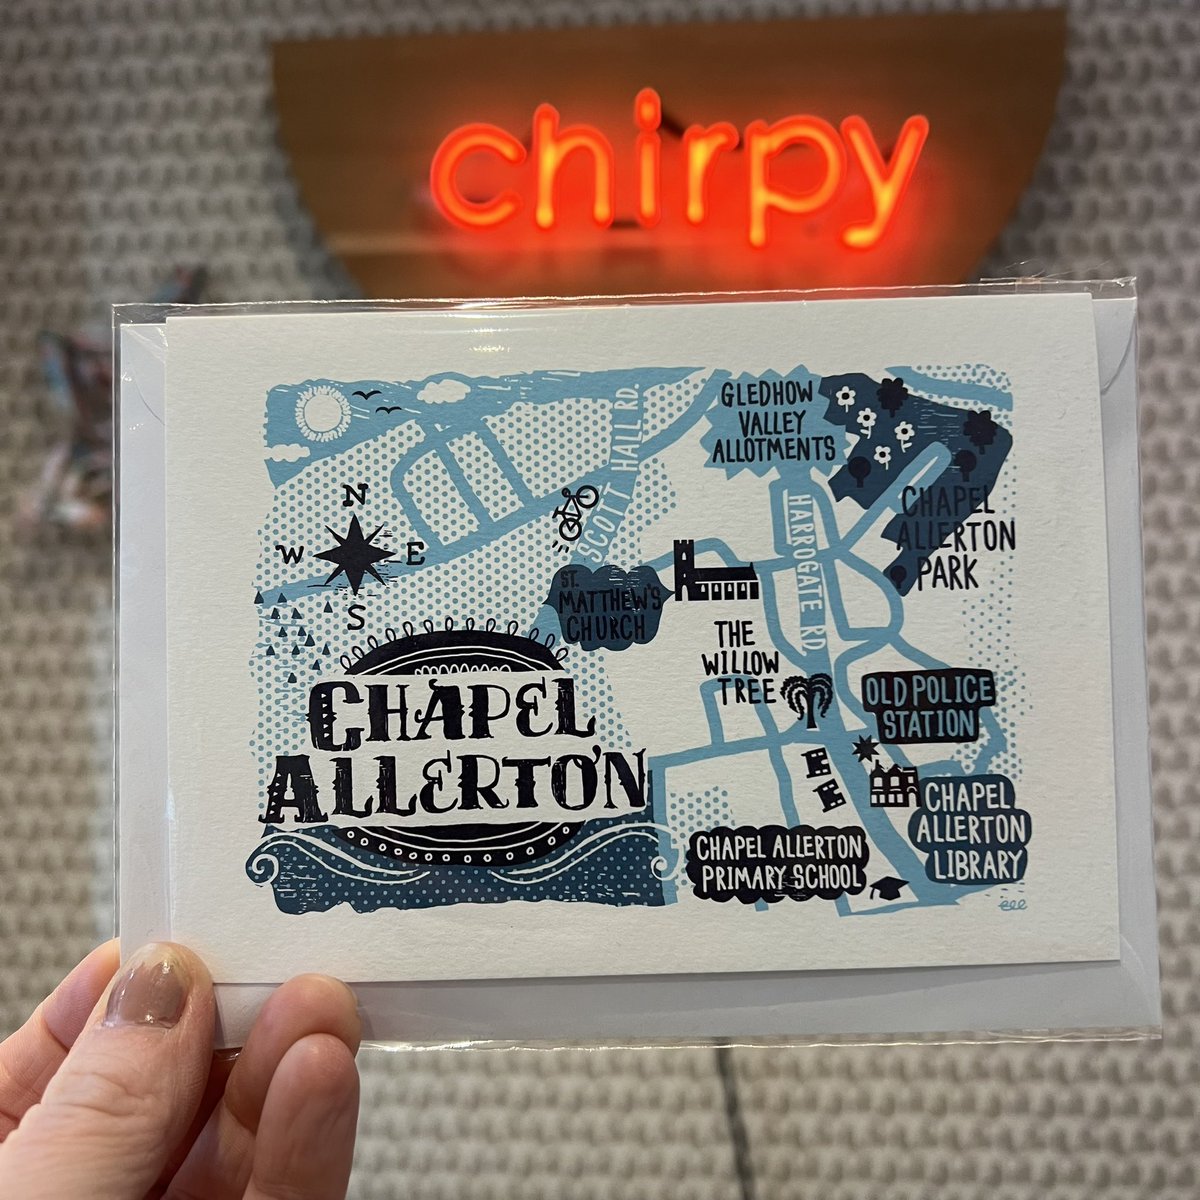 NEIGHBOURHOOD Chapel Allerton “creativity is at the heart of the art” “Chirpy is a lifestyle design store with a range of workshops & events” The Guardian Have you visited recently?